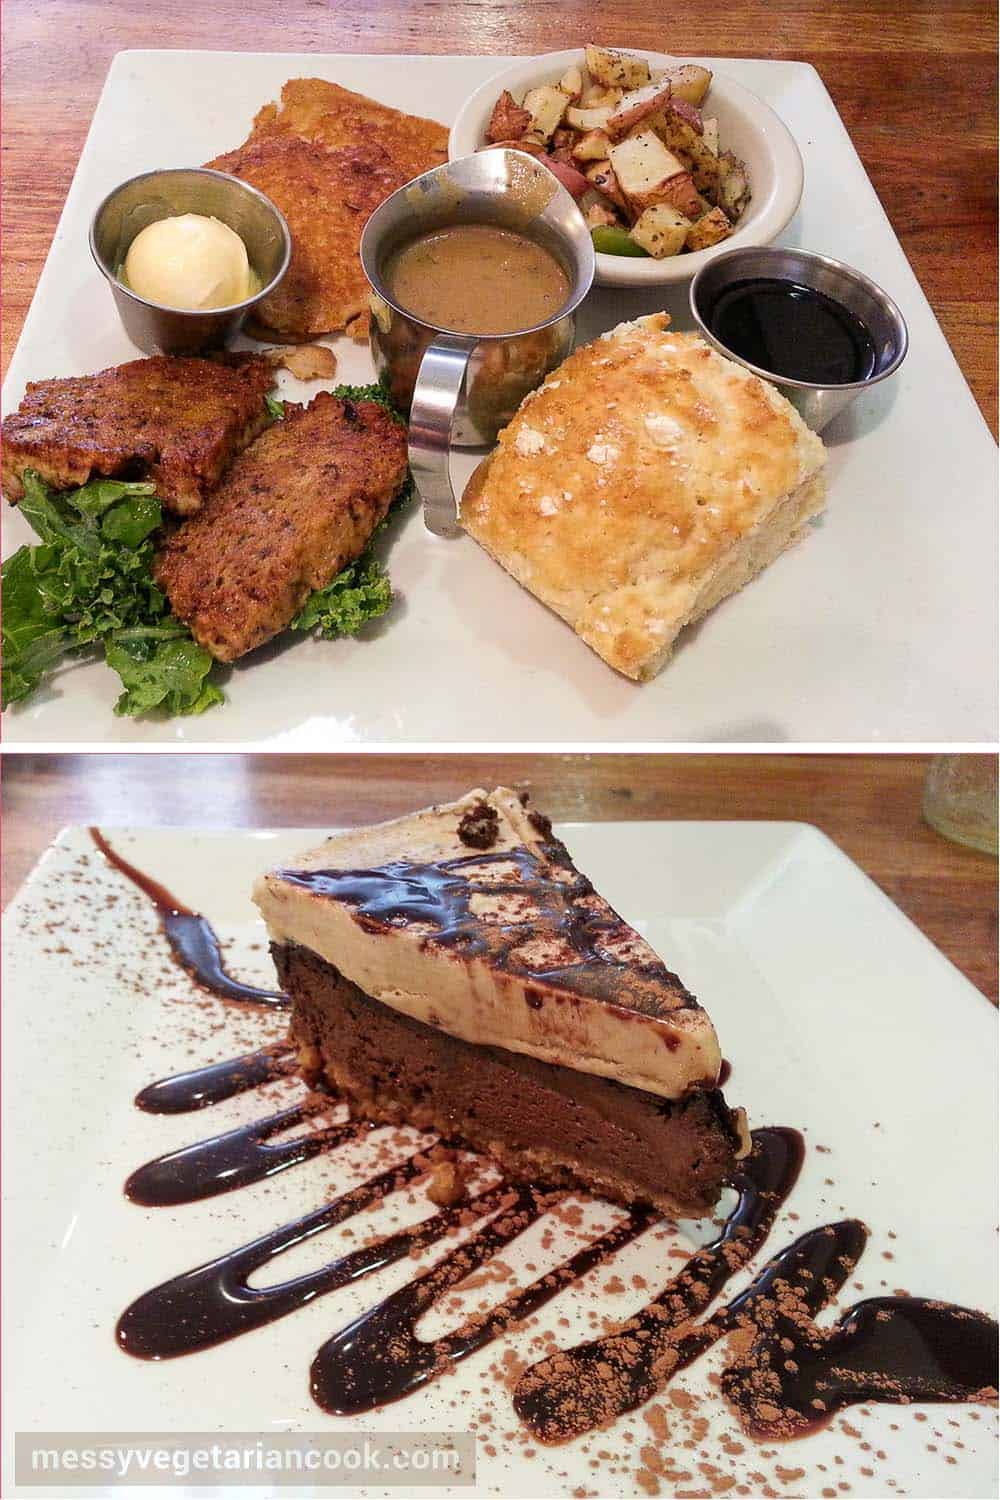 Biscuits and Gravy and chocolate peanut butter cheesecake at Flore Vegan